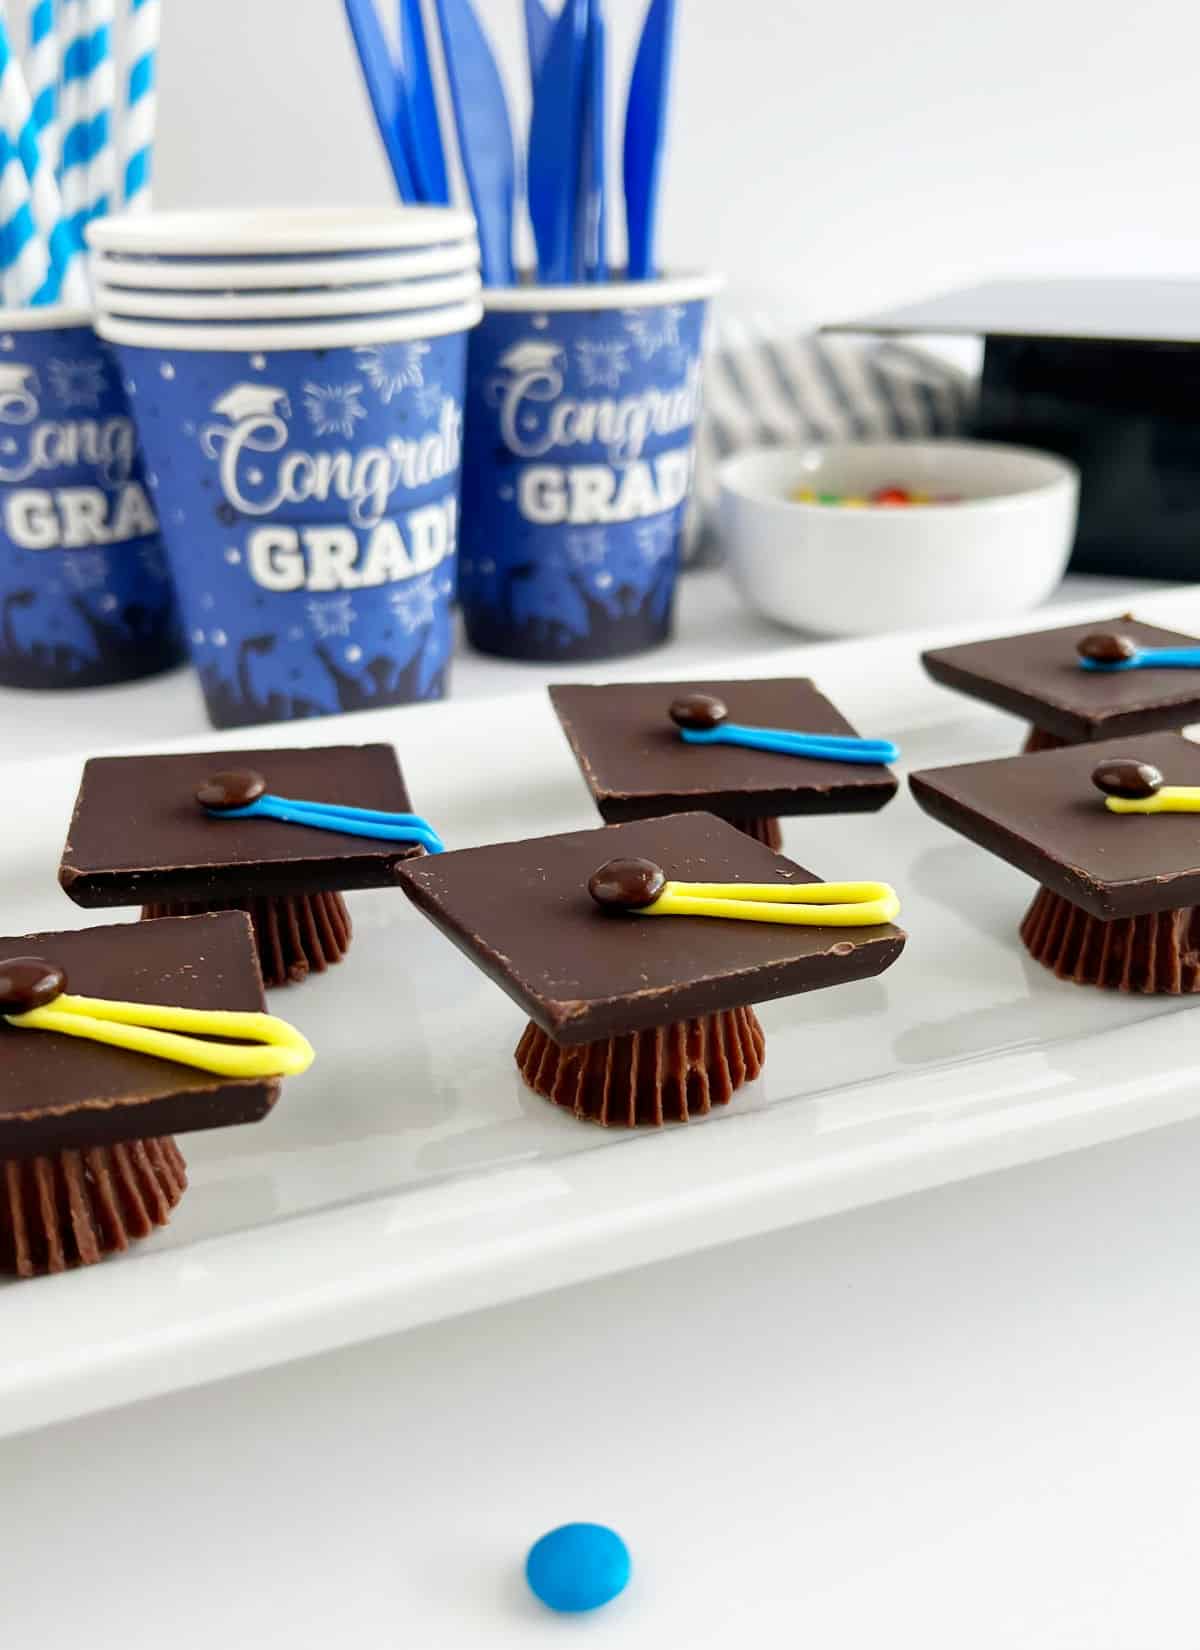 candy graduation caps treats on table with party supplies.